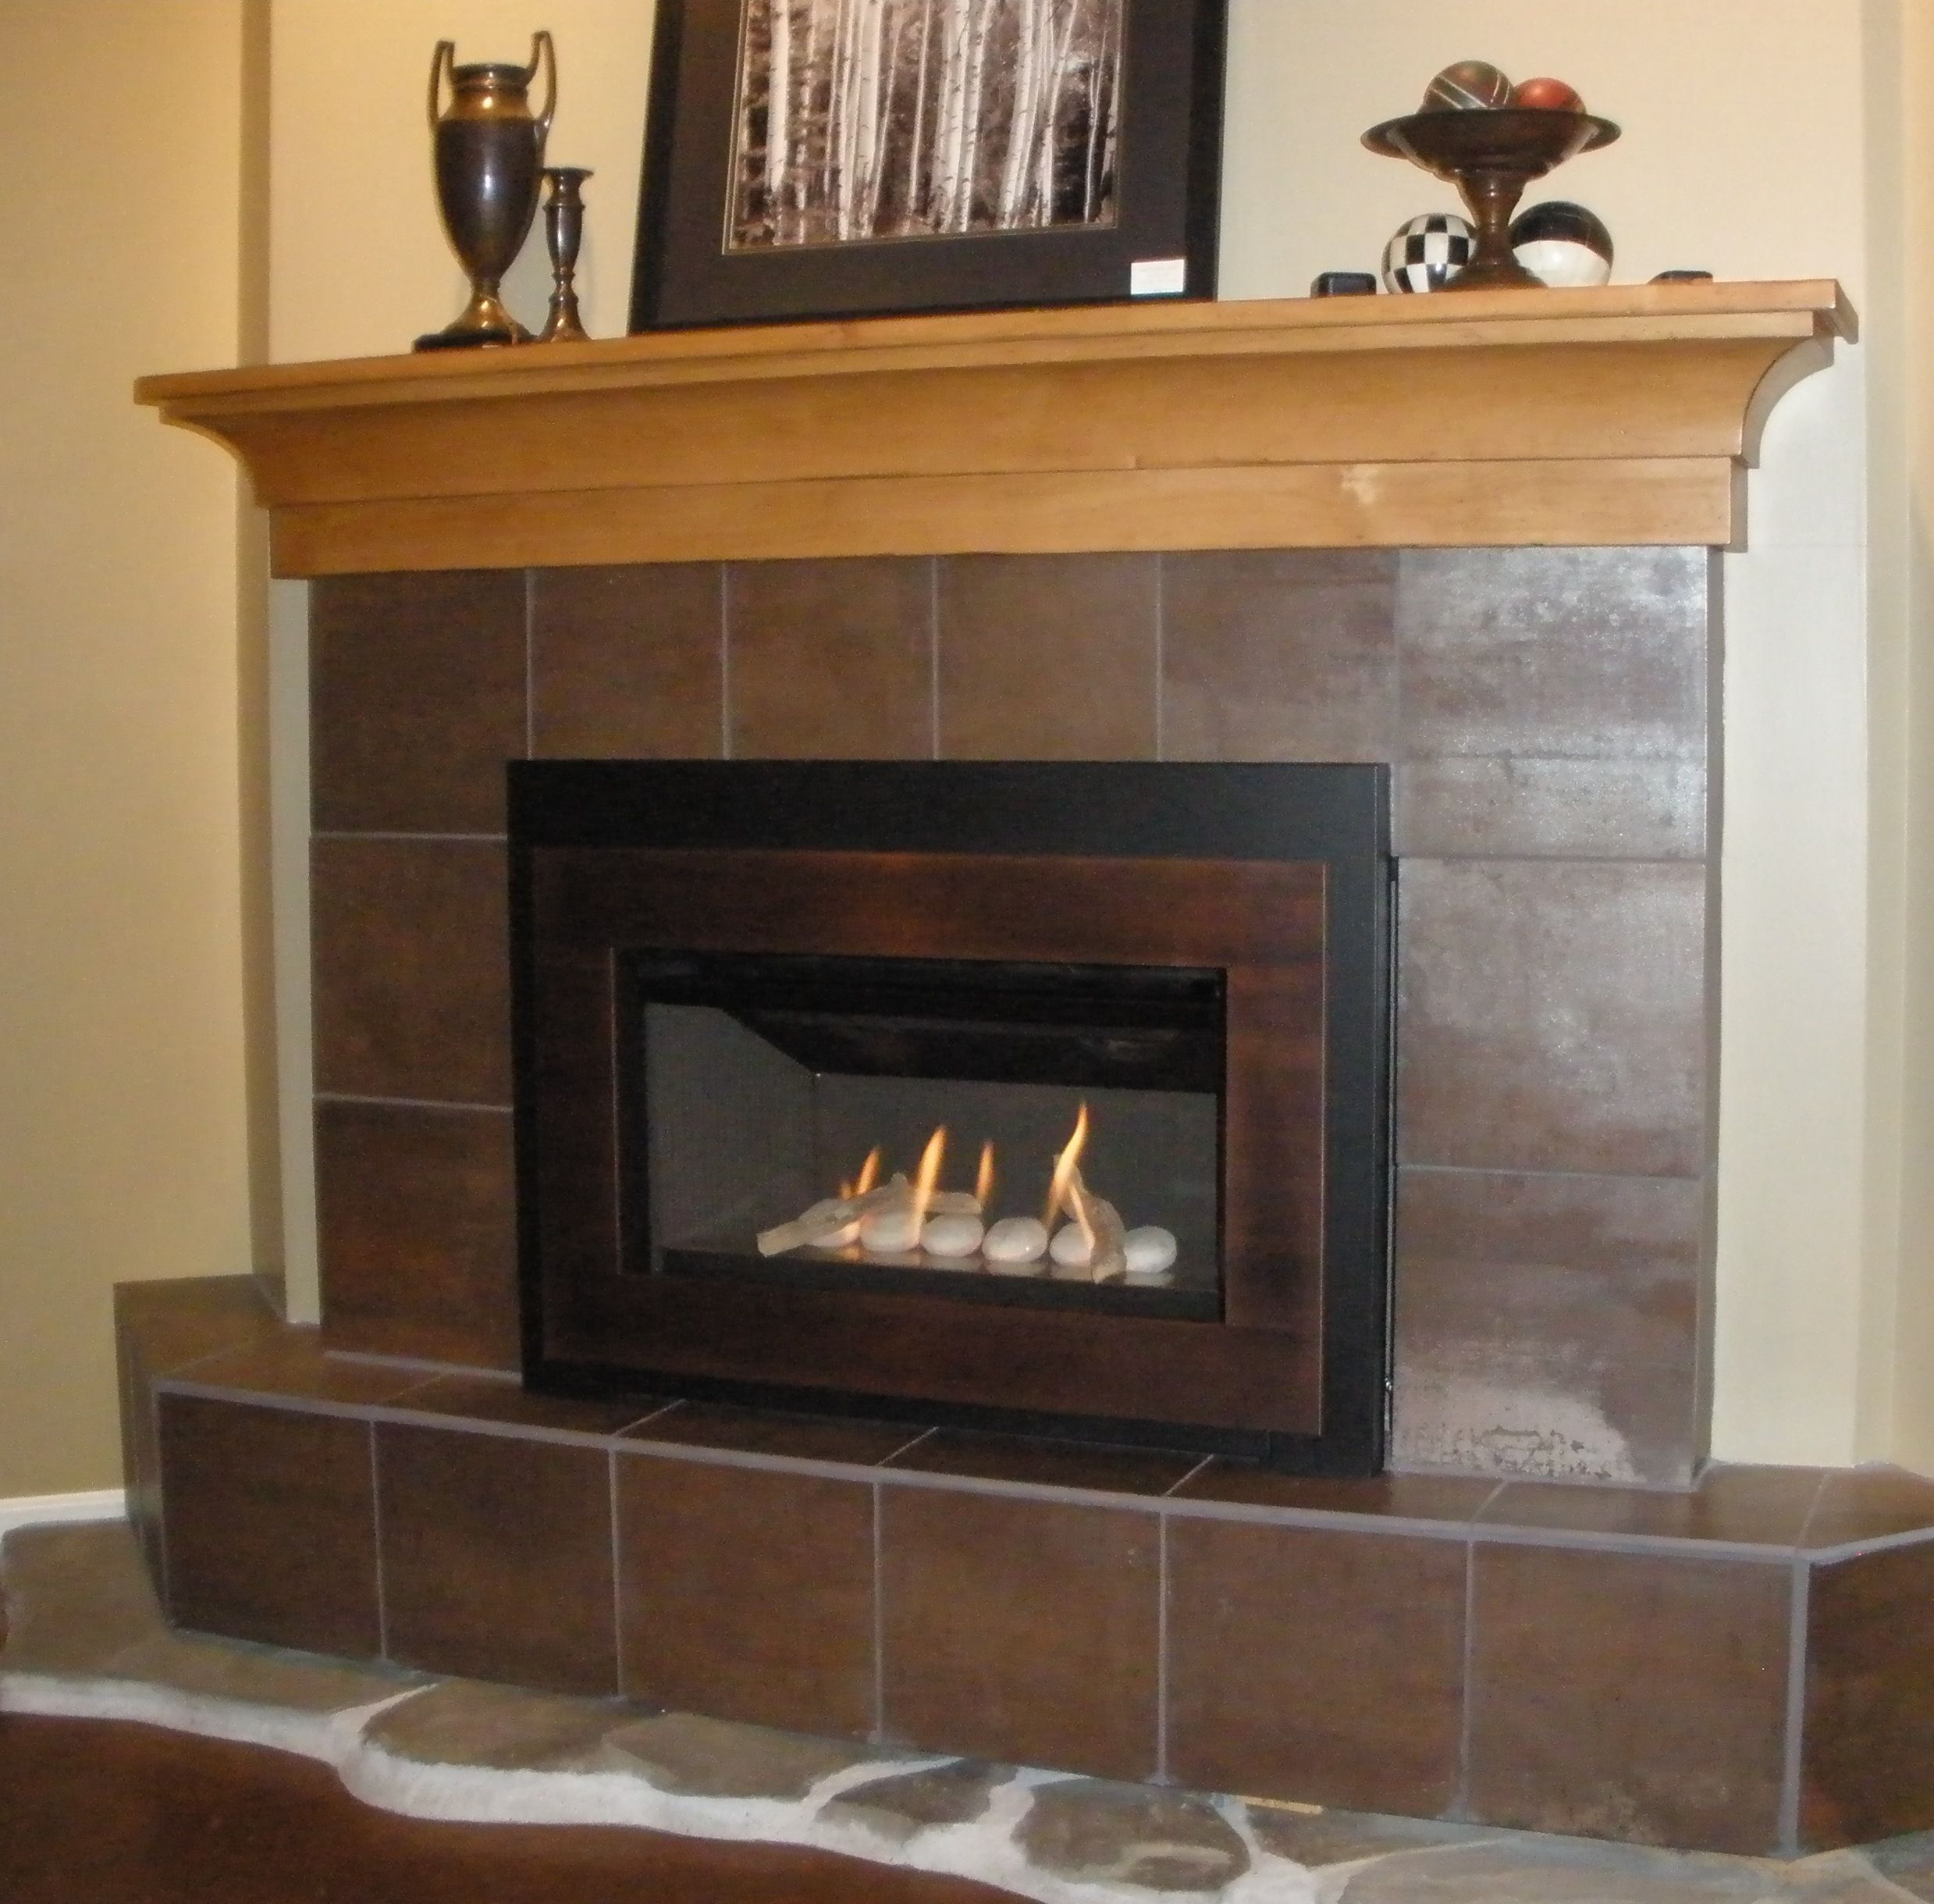 Fireplace Insert Frame Fresh Pin On Valor Radiant Gas Fireplaces Midwest Dealer